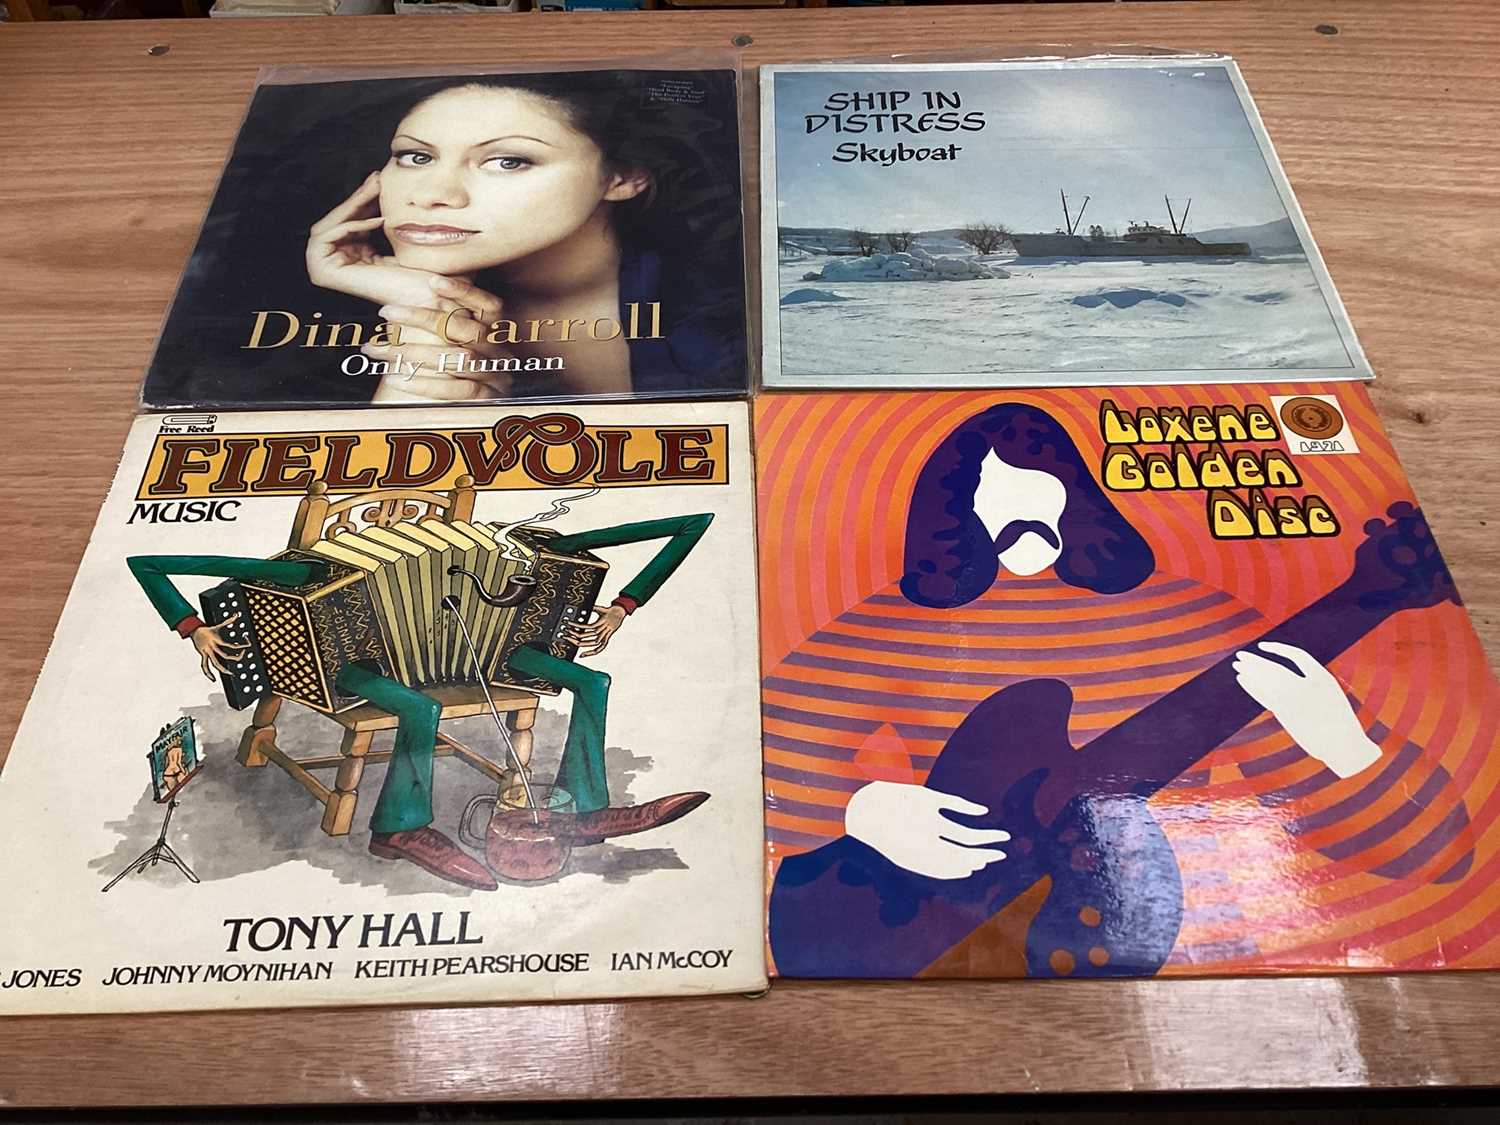 Box of LPs, including Beatles, David Bowie, Pink Floyd, Pixies, etc - Image 10 of 30